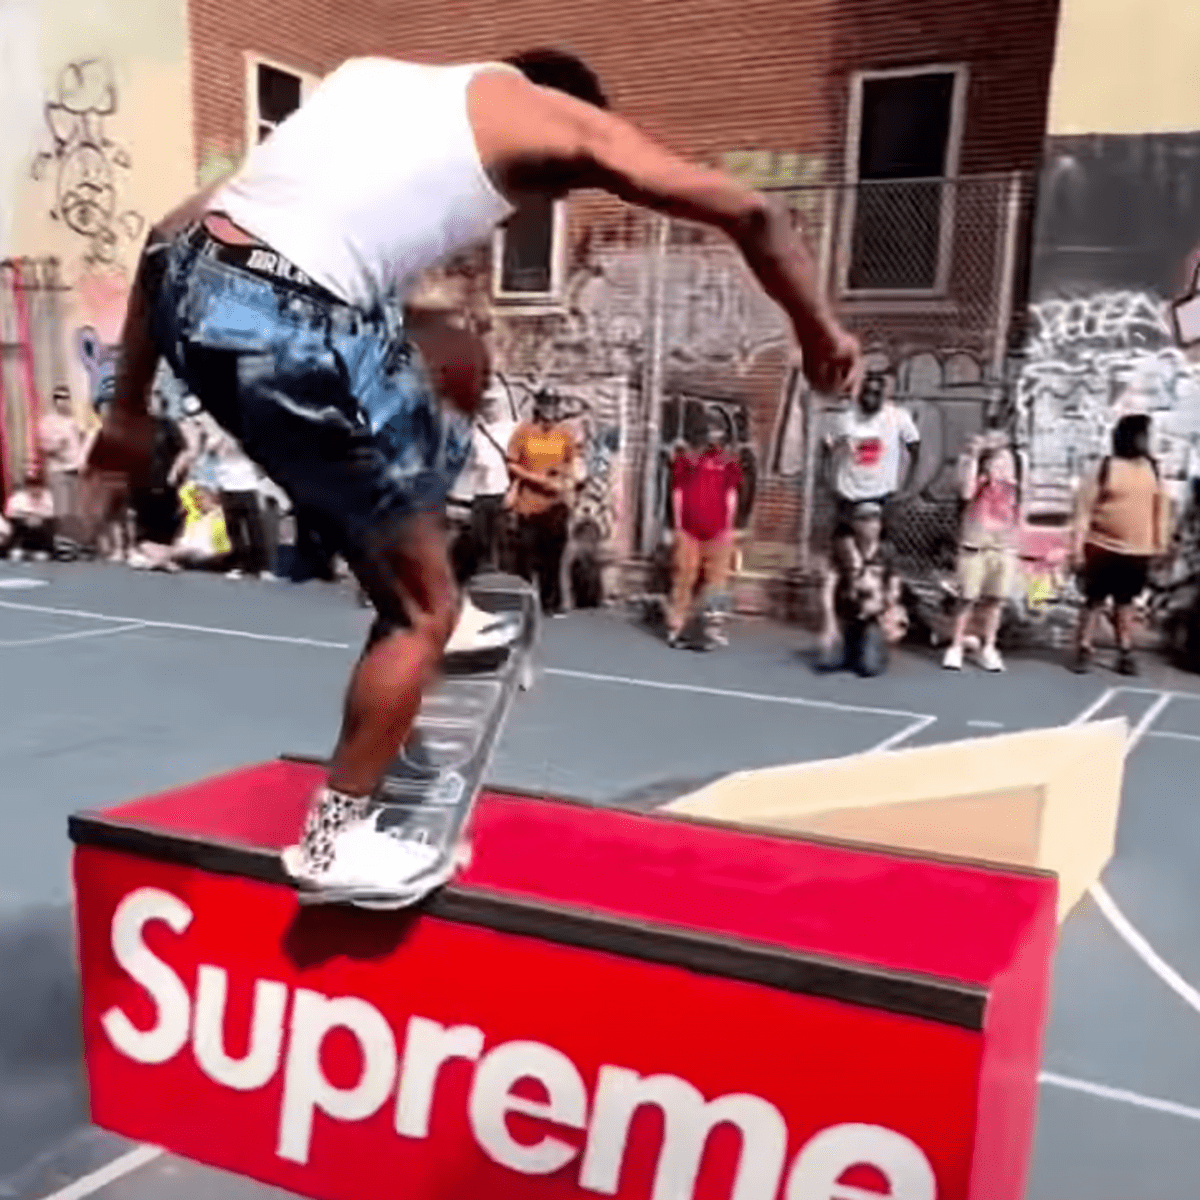 All The iPhone Clips You Need To See From The Supreme x Hardies Skate Jam -  TransWorld SKATEboarding Magazine